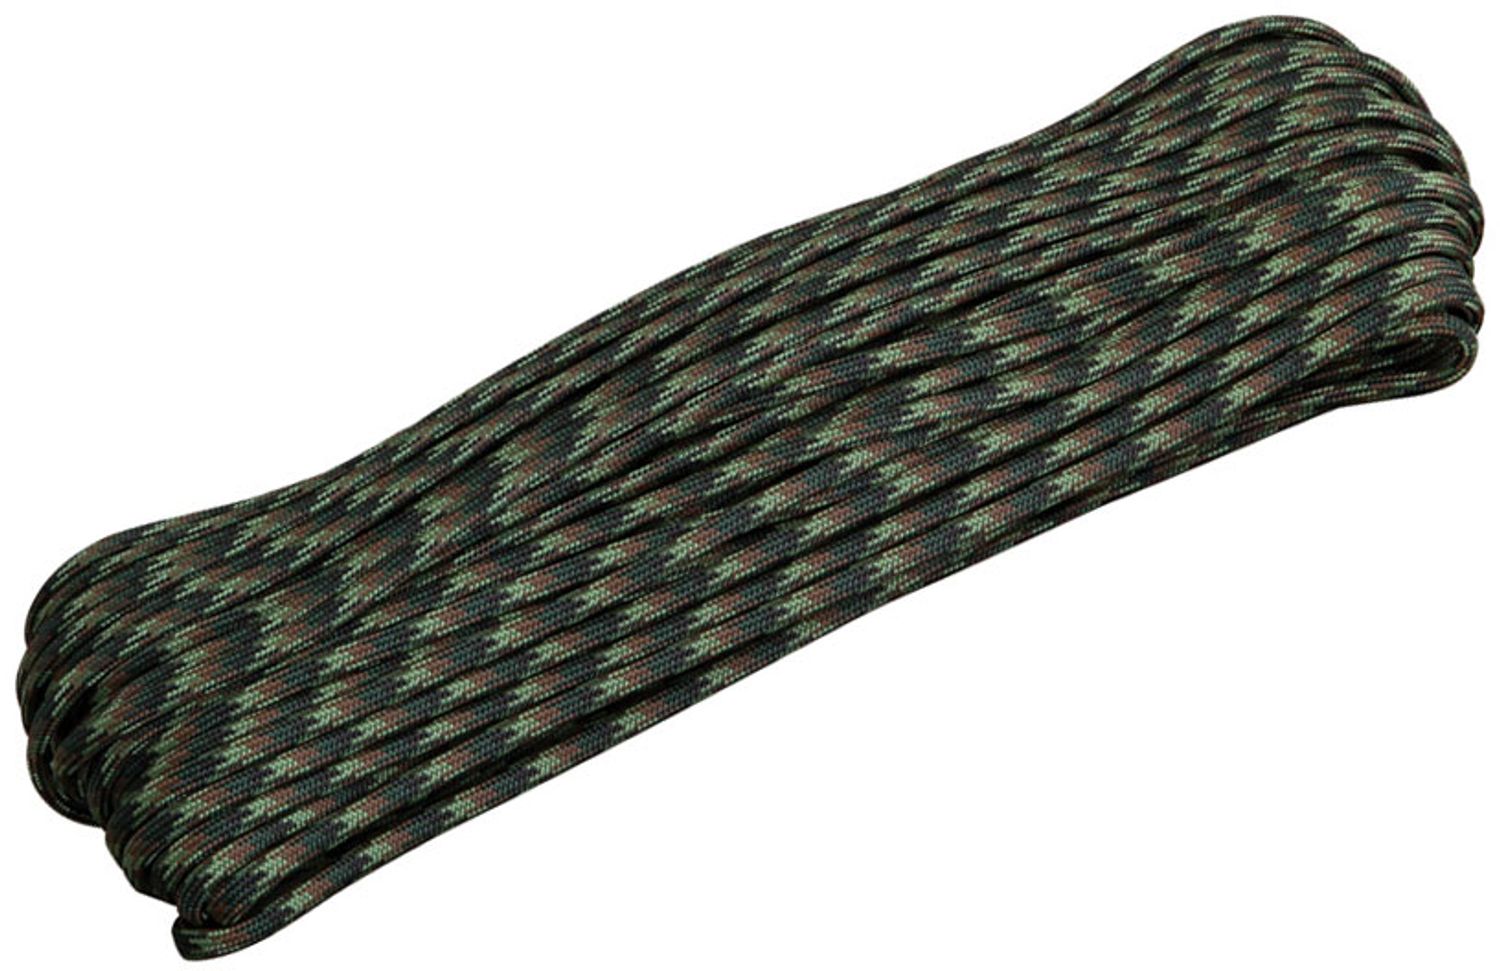 Atwood Rope 550 Paracord, Woodland Camo, 100 Feet - KnifeCenter - RG005H